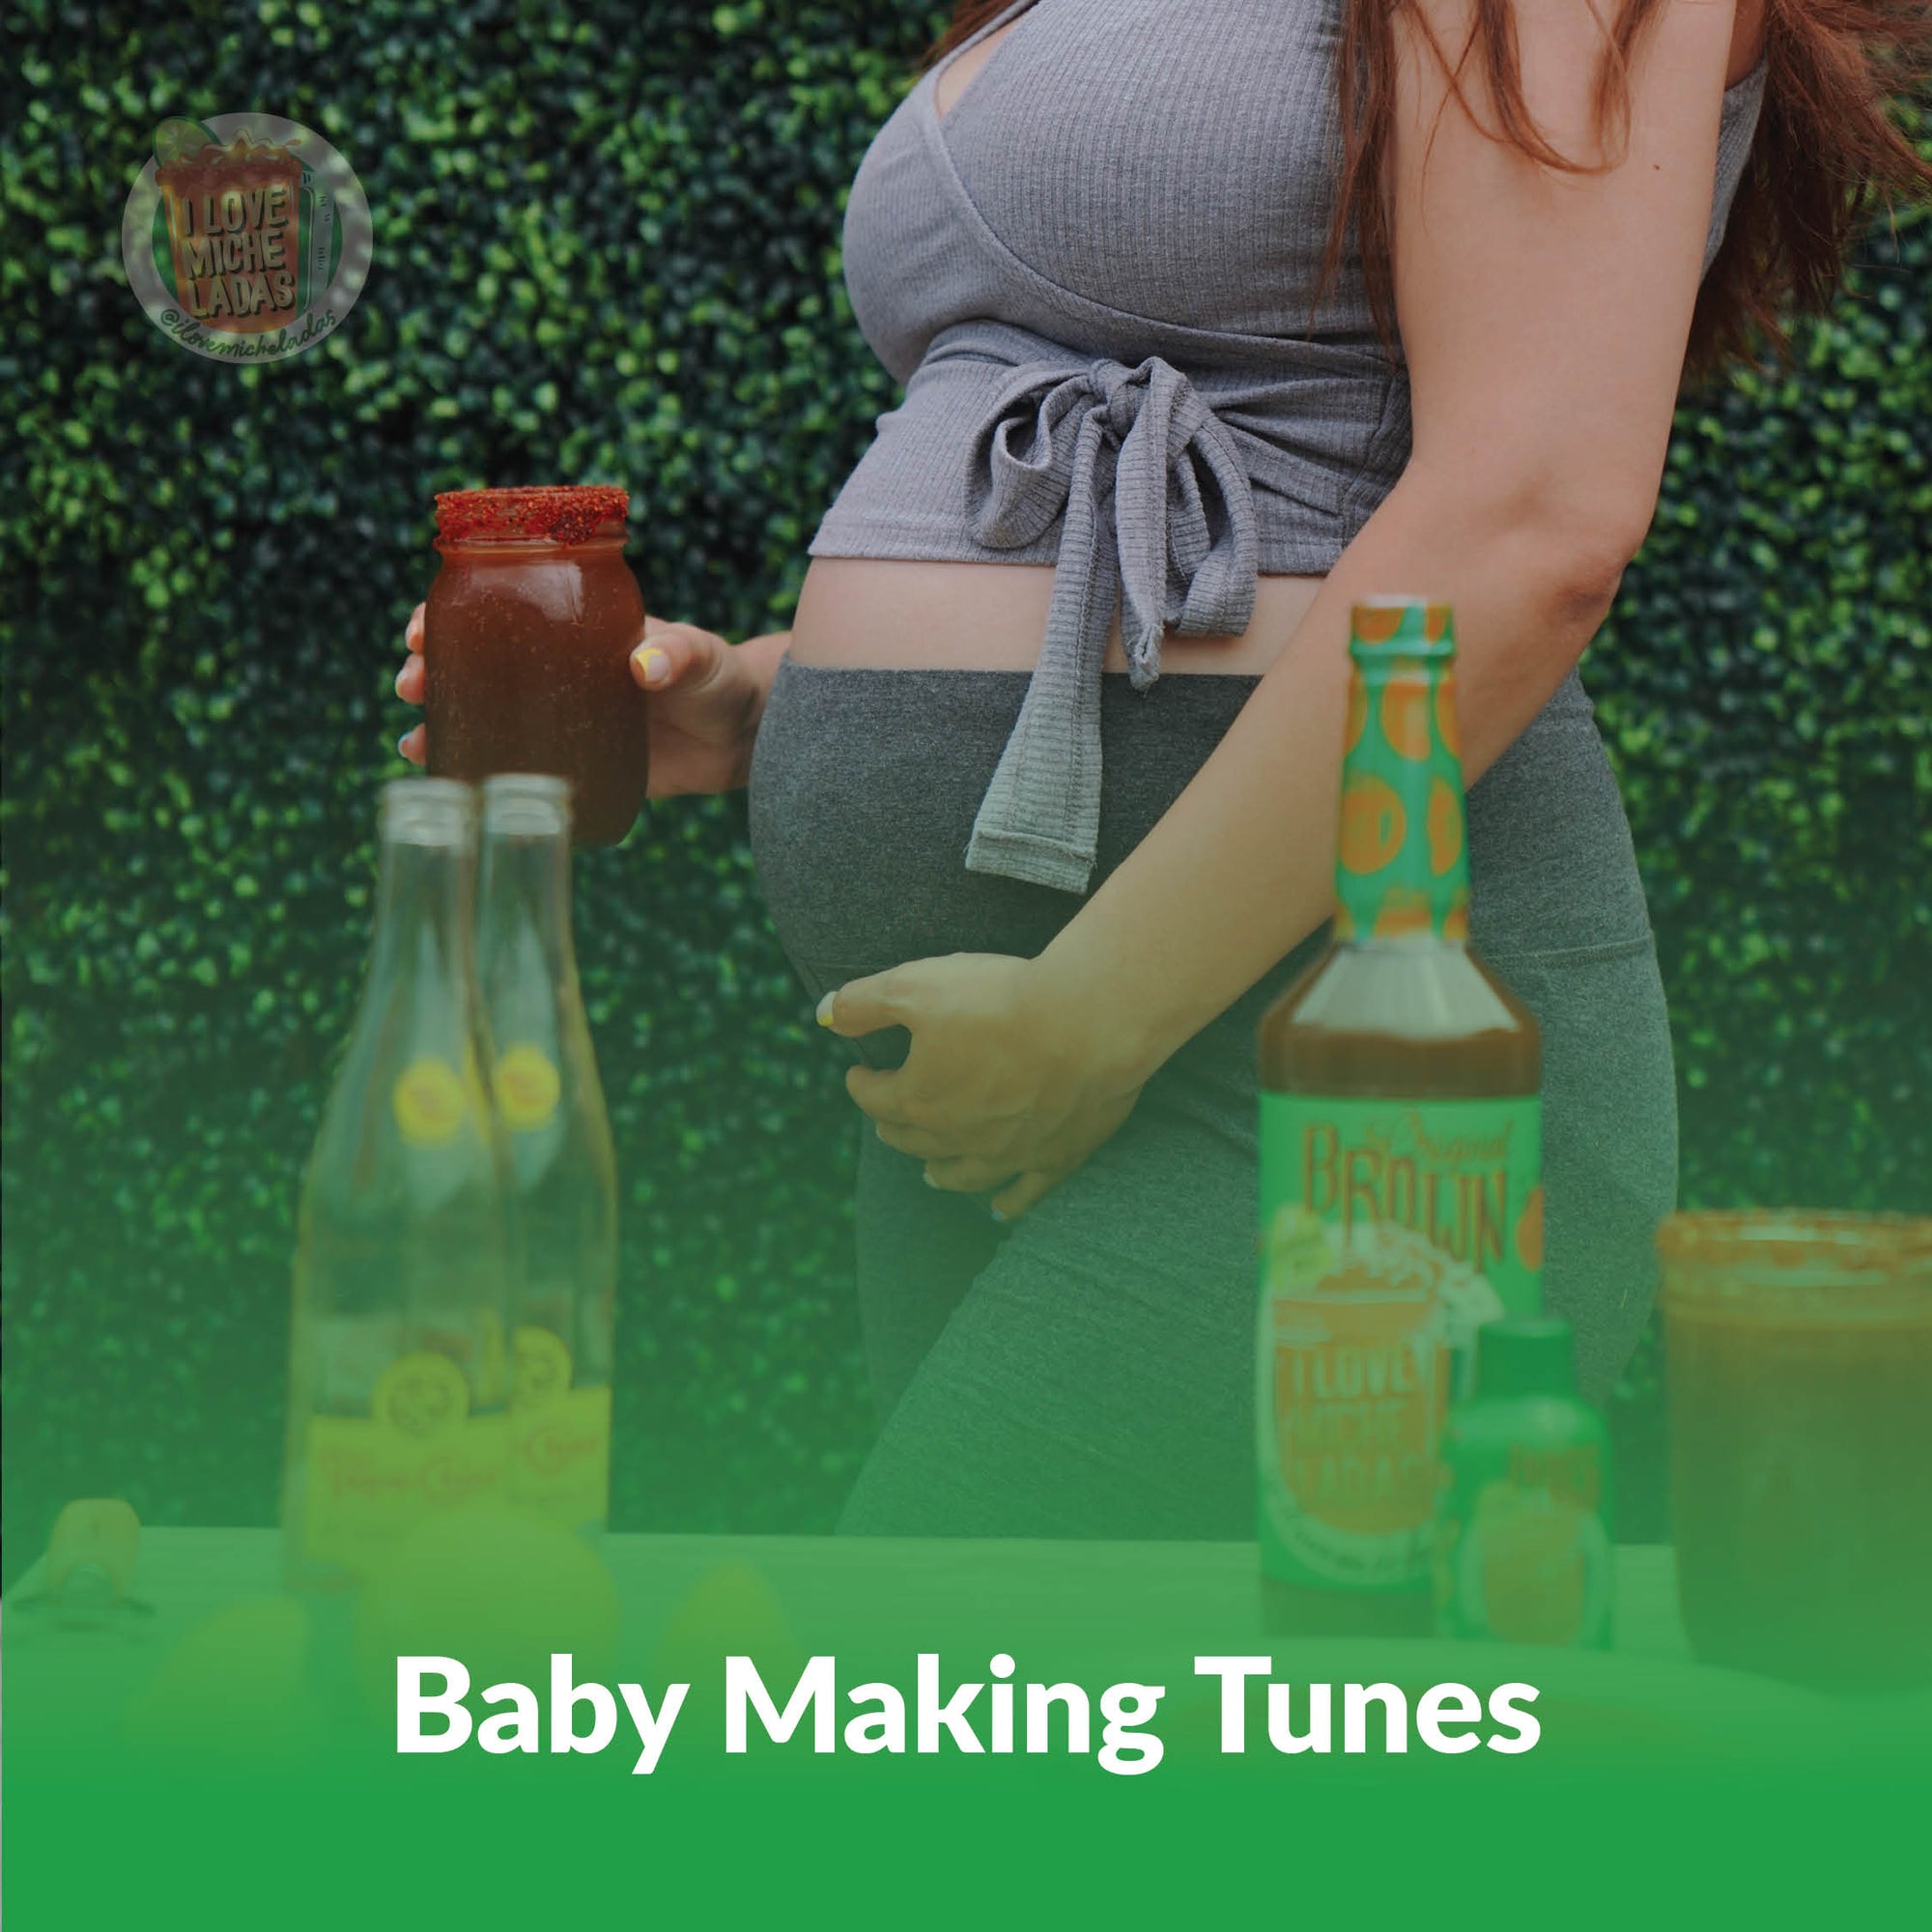 MICHE MIX OF THE WEEK: THE ONE WITH THE BABY MAKING TUNES!! (Abuelita, Cover Your Ears…. This Playlist Is Not For You!!)